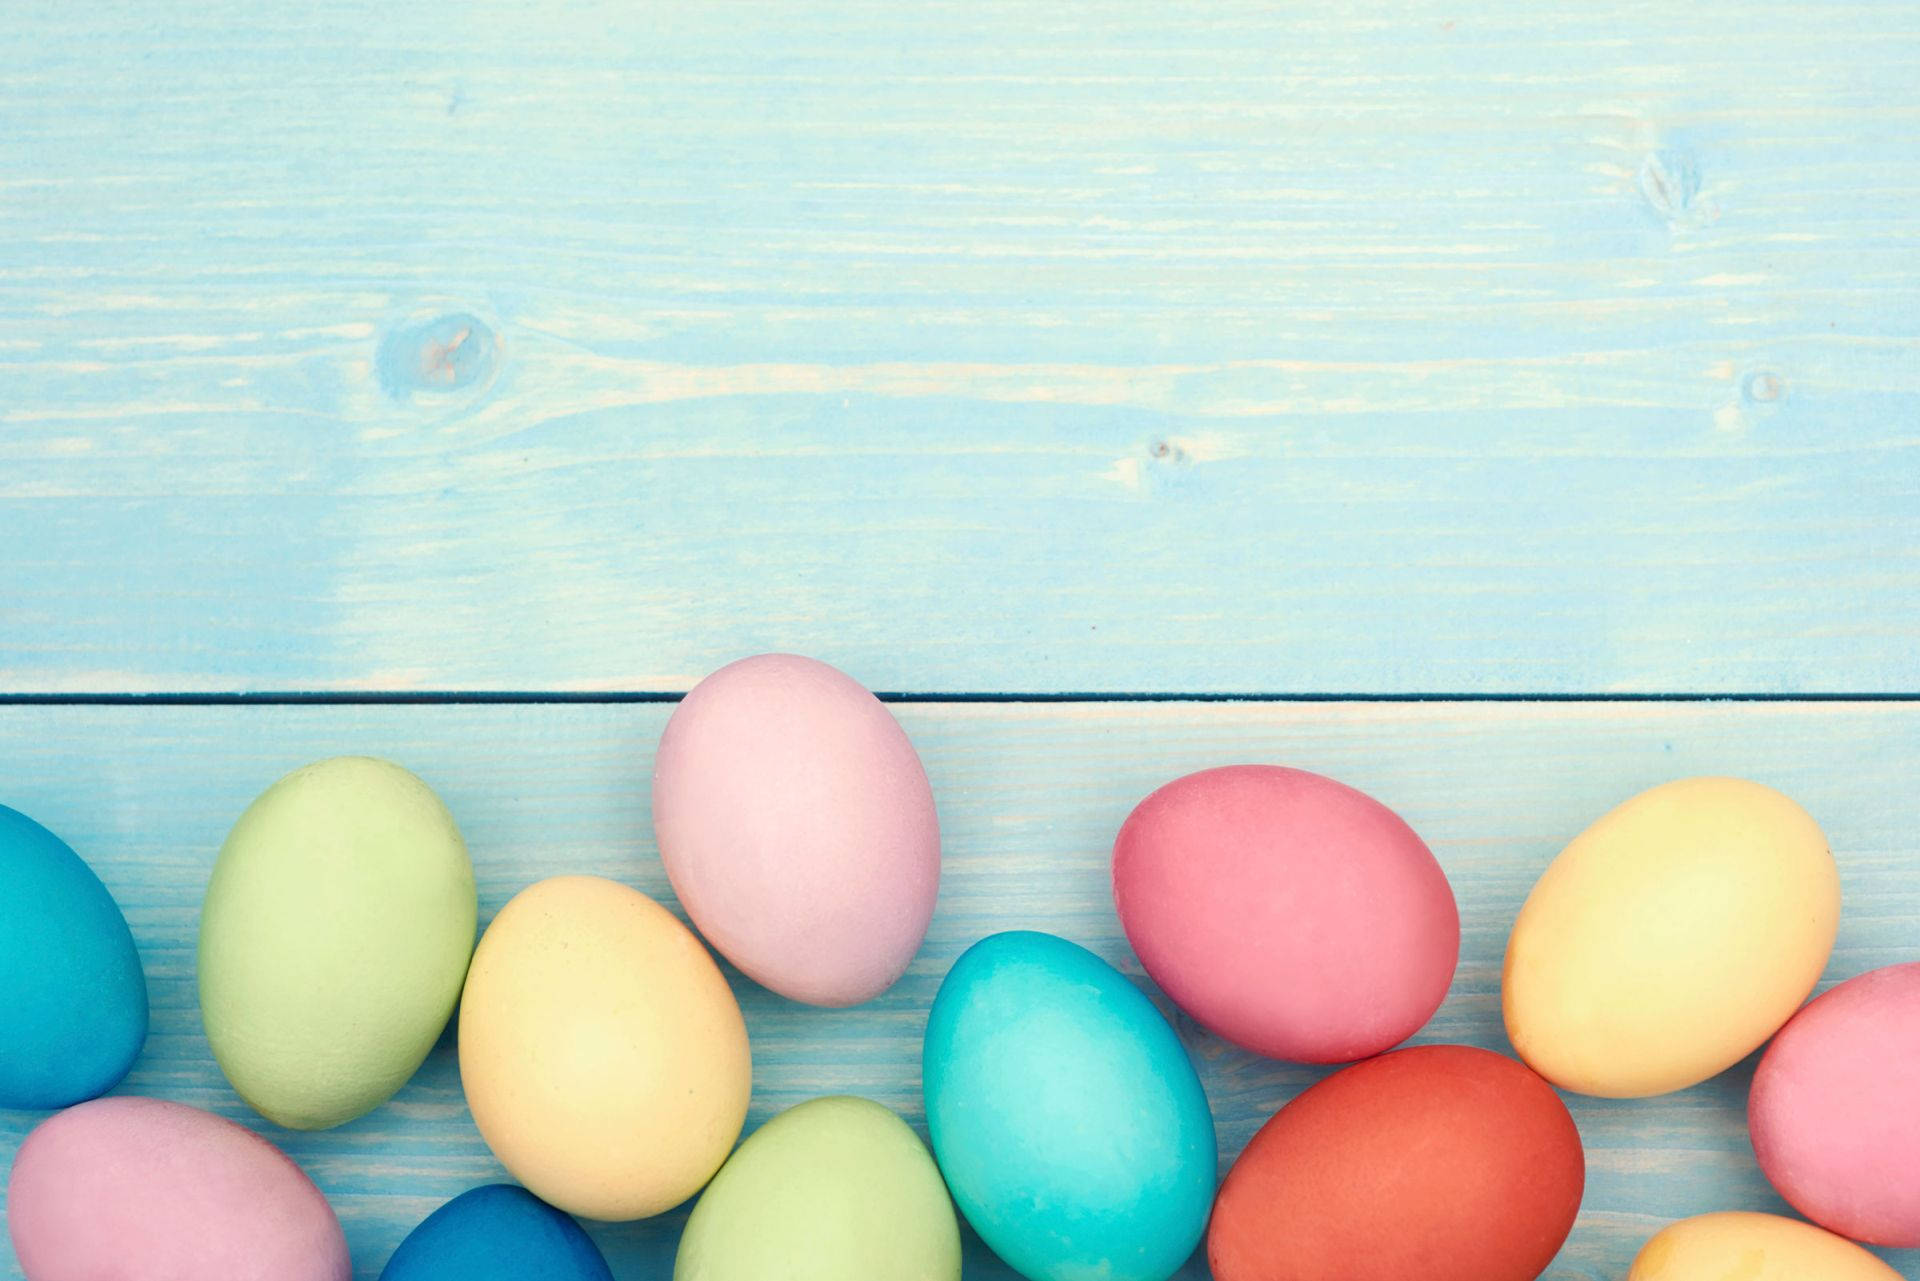 Celebrate Easter with painted eggs and pastel spring colors Wallpaper